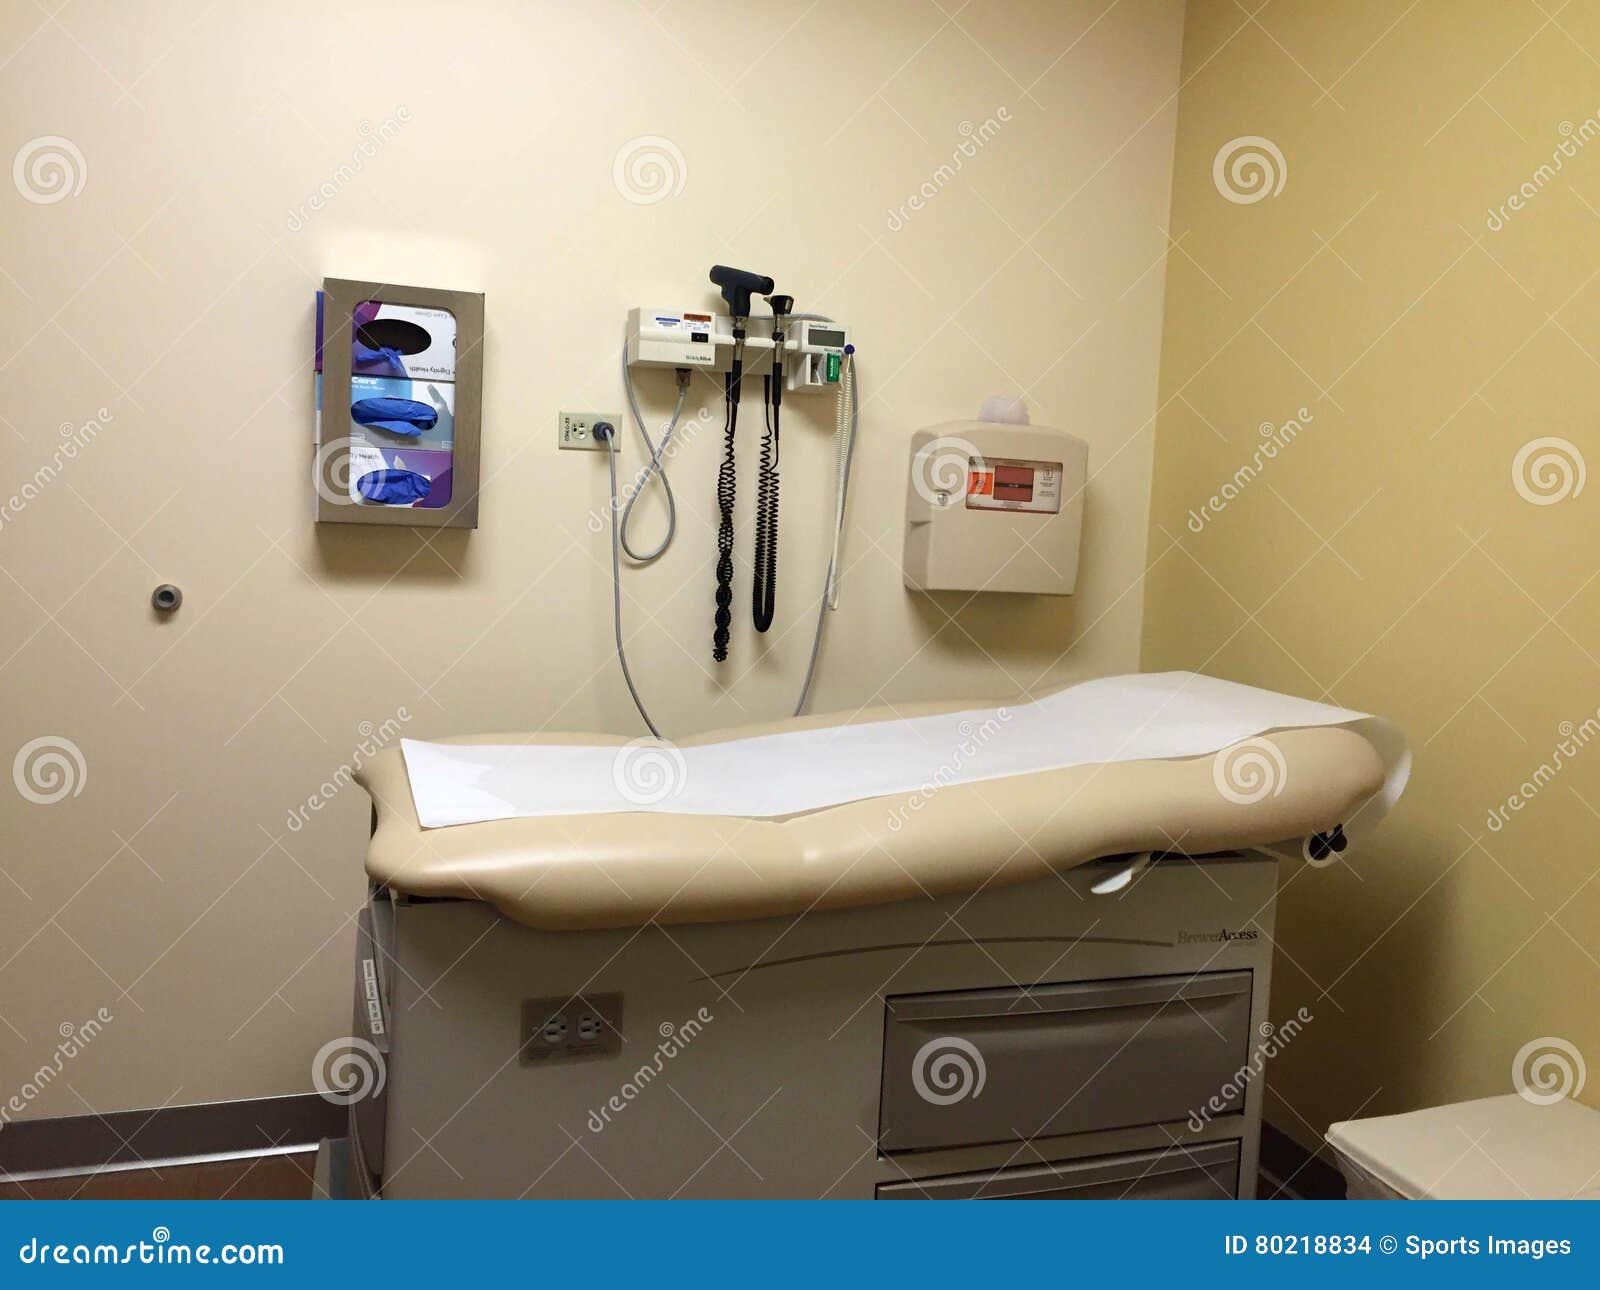 Doctors Equipment Used In The Exam Room Editorial Stock Image